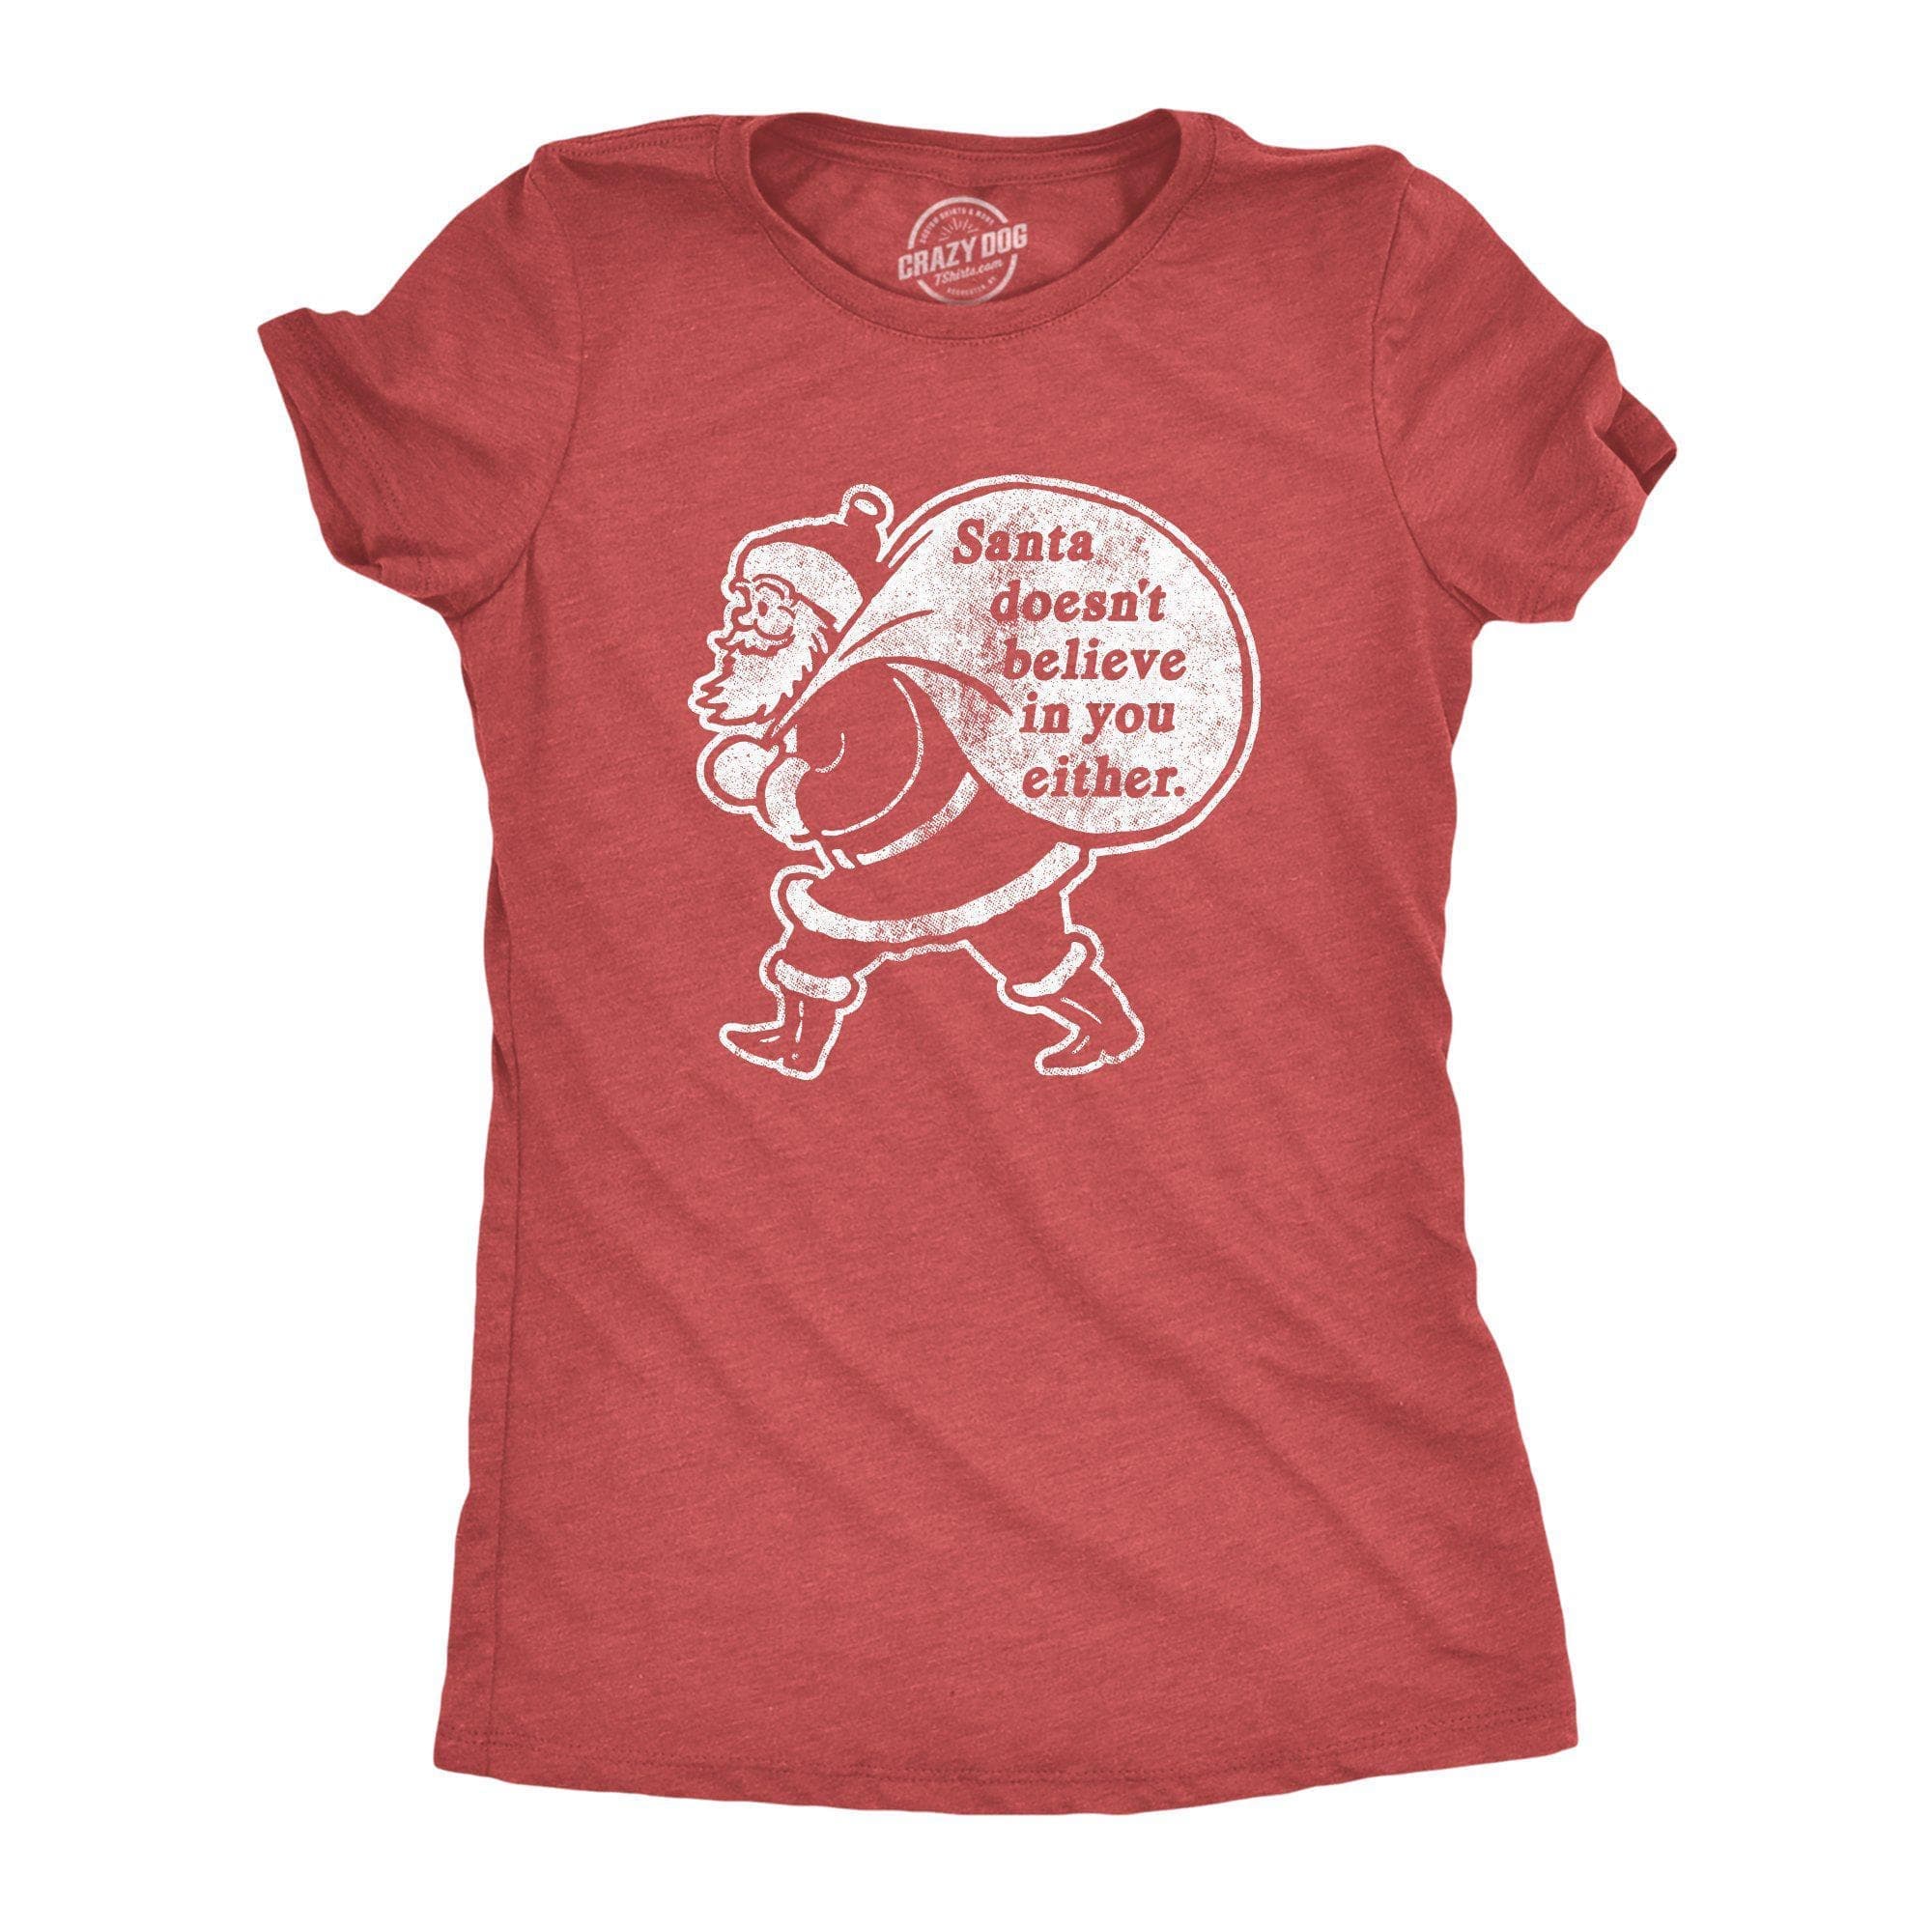 Santa Doesn't Believe In You Either Women's Tshirt - Crazy Dog T-Shirts